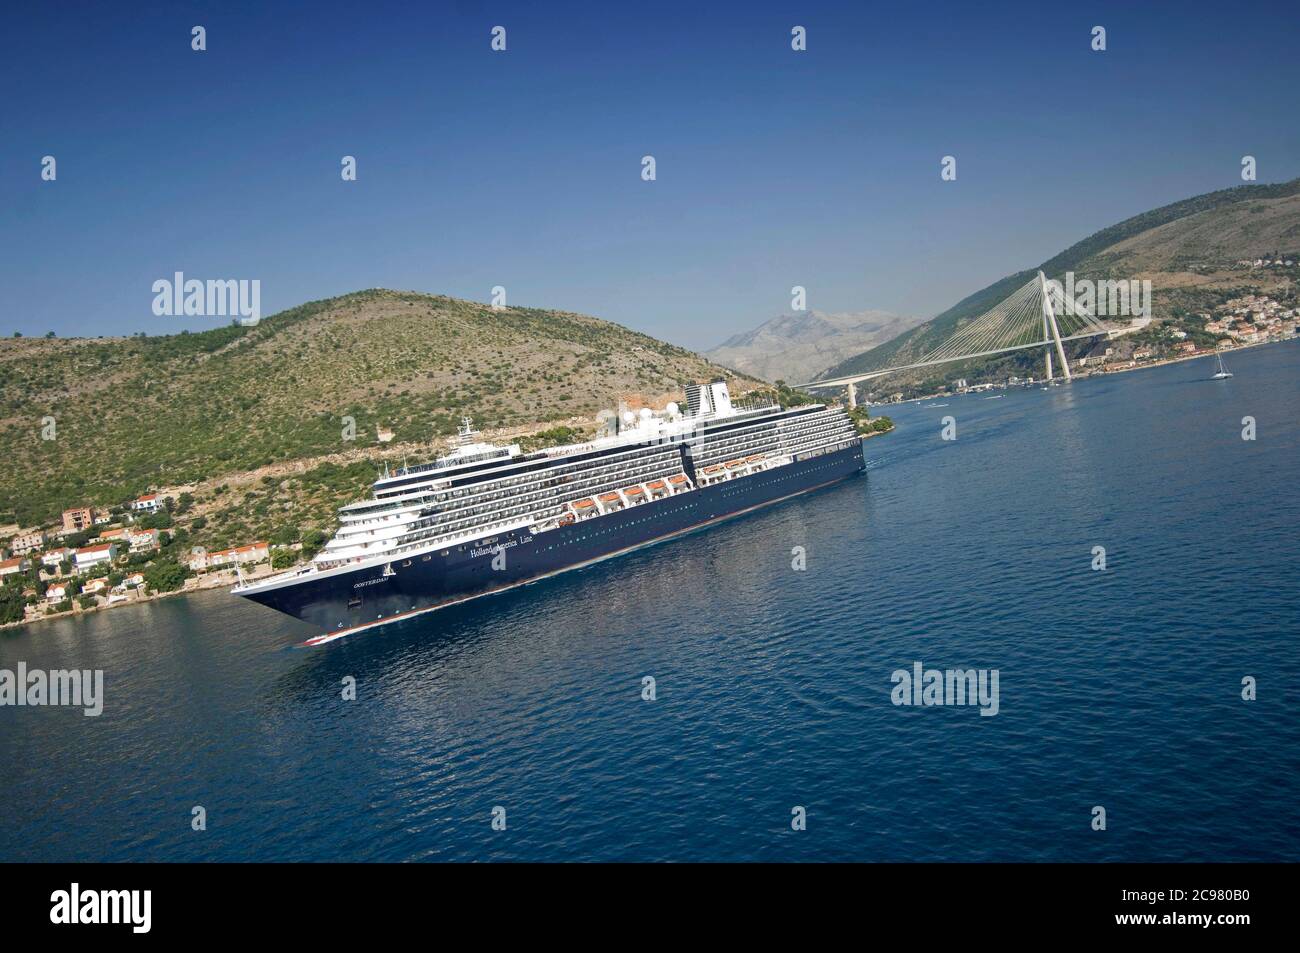 The MS Oosterdam, Holland America Line Vista class cruise ship leaving the port of Dubrovnik in Southern Croatia. Stock Photo